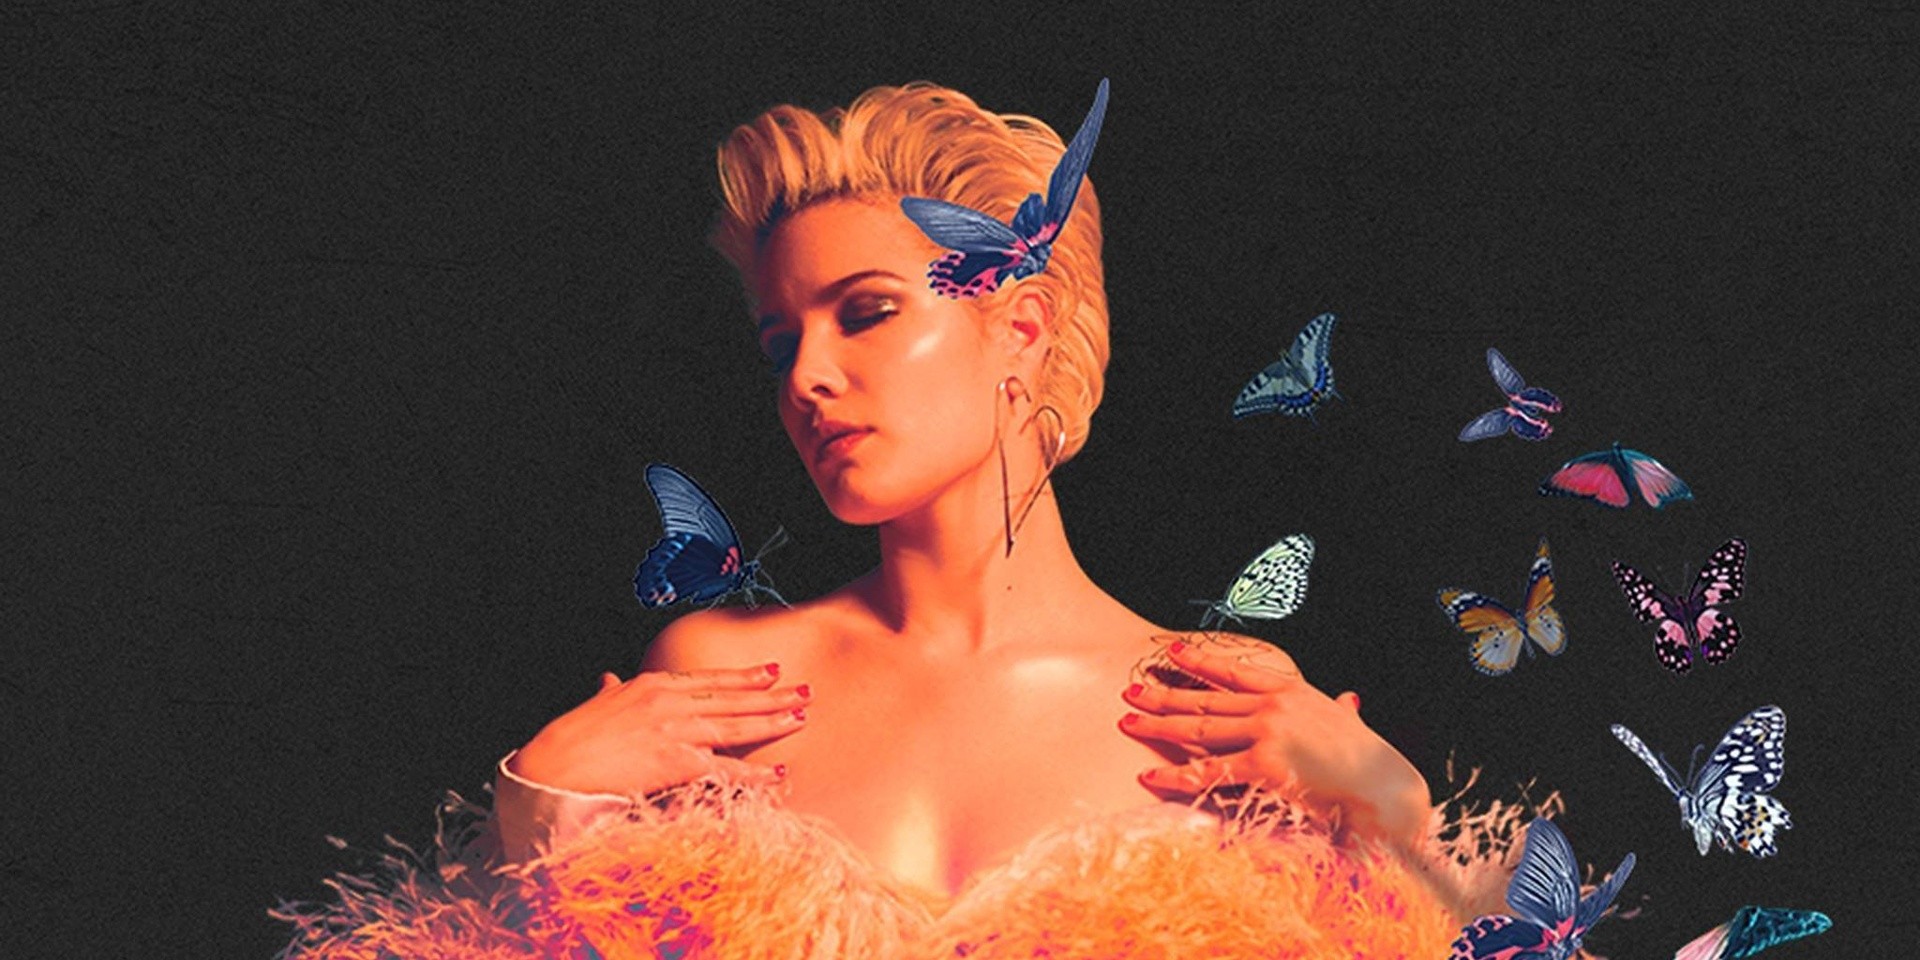 Ticketing details for Halsey's Singapore show released